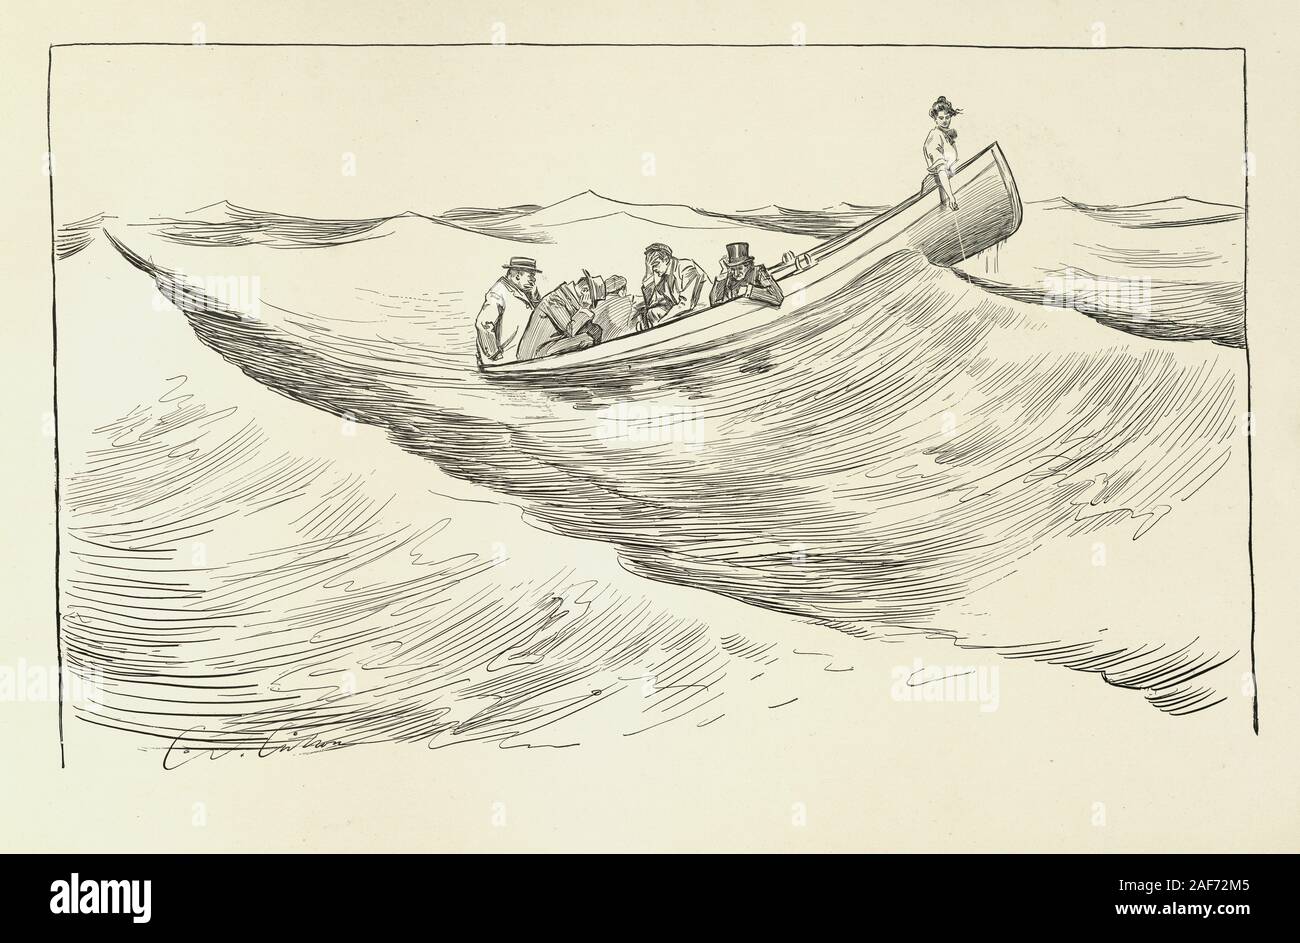 A Widow And Her Friends, Charles Dana Gibson. They go fishing. Young woman in a boat with a group of men, 1900 Stock Photo